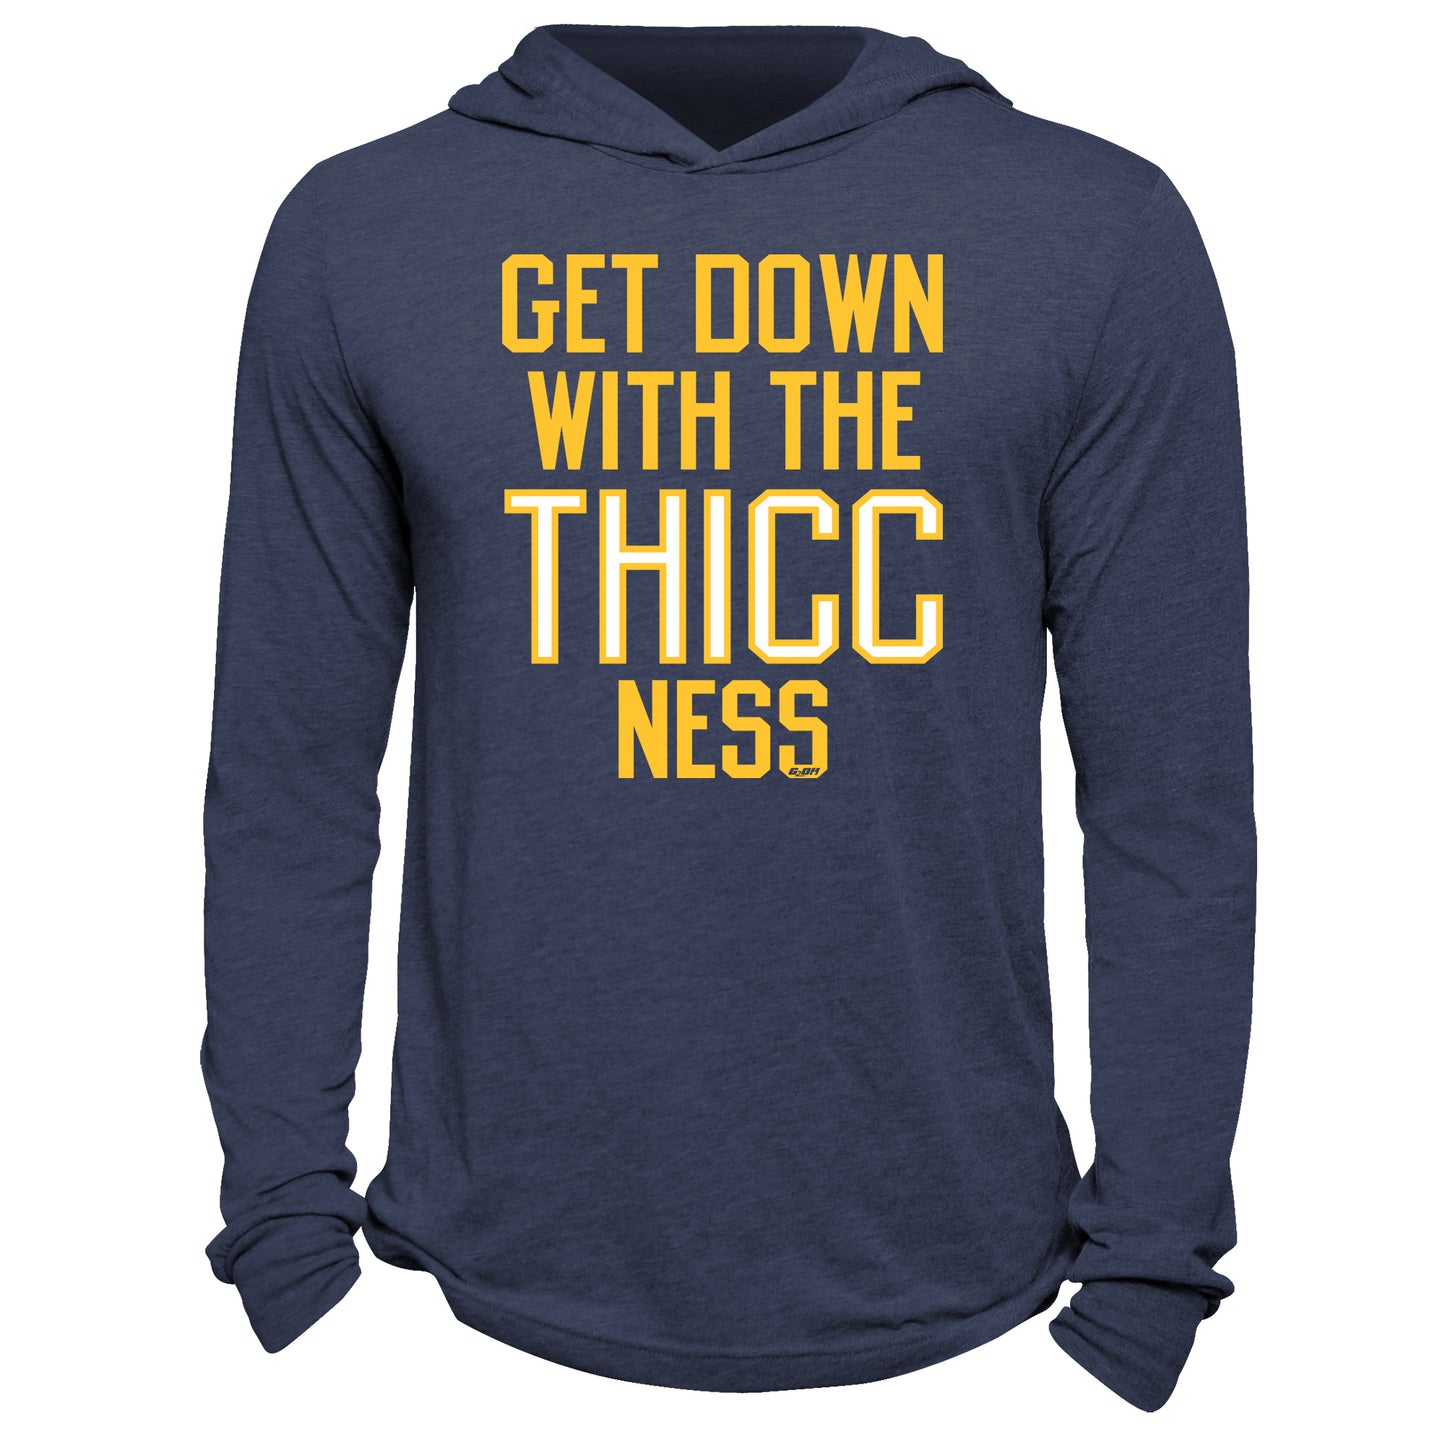 Get Down With The Thiccness Hoodie